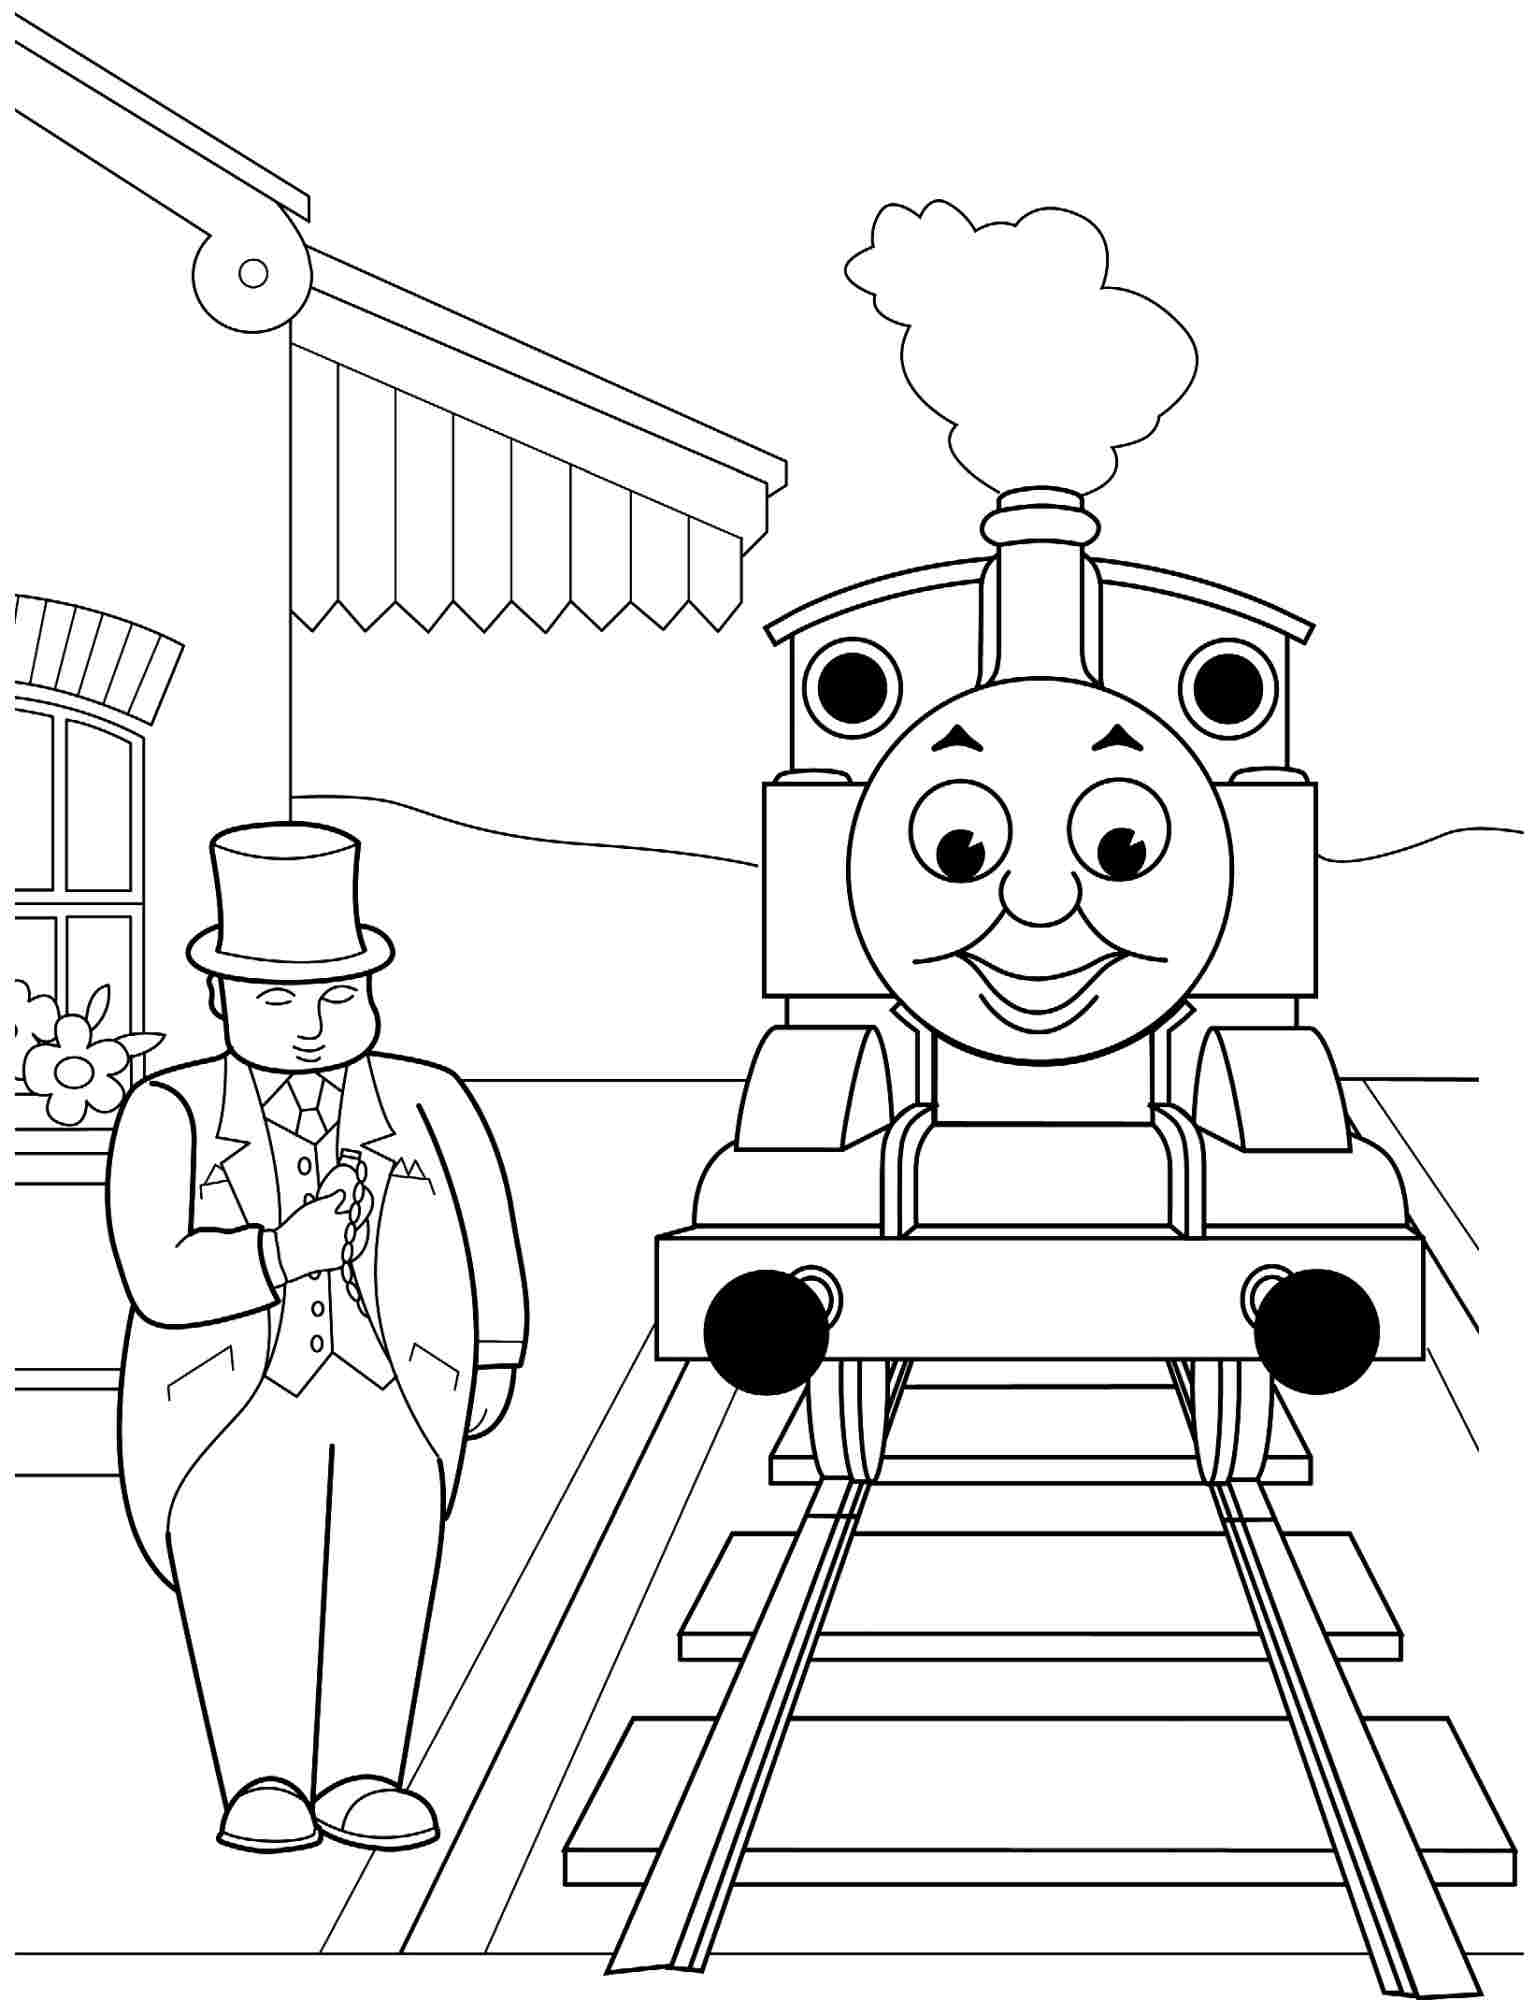 Thomas The Train Coloring Pages Pdf at Free